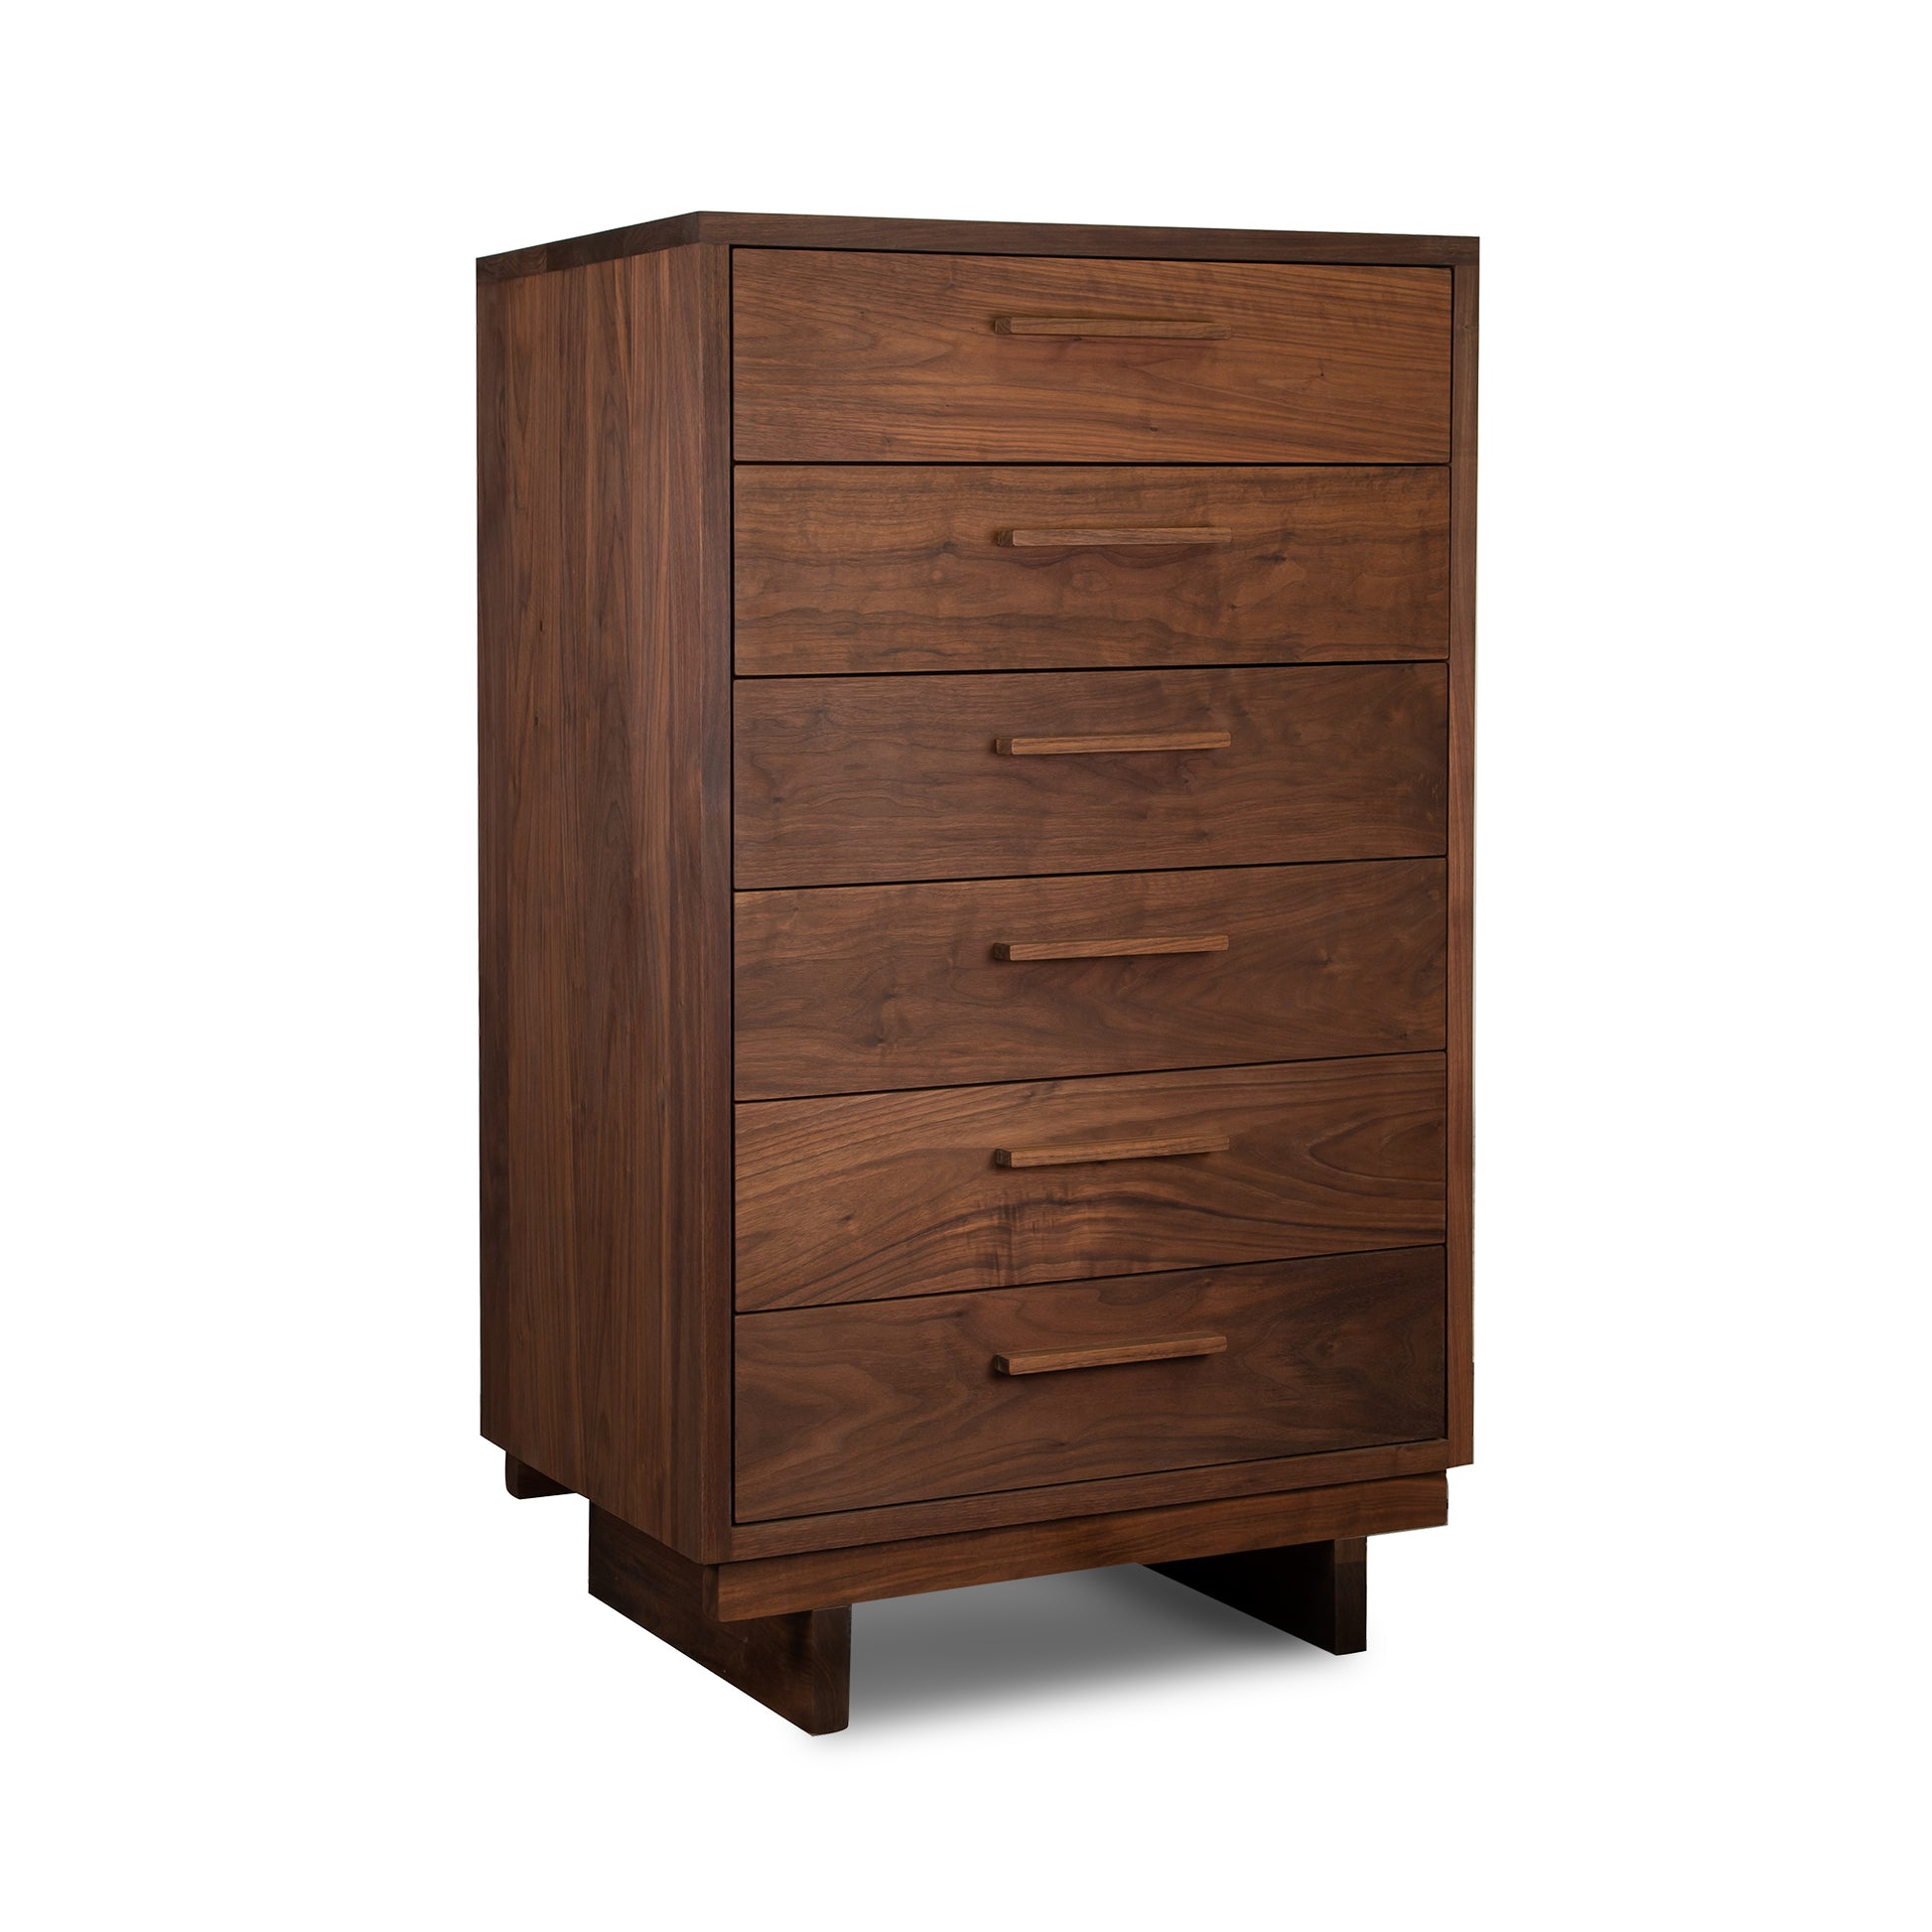 A modern chest of drawers with wooden drawers.